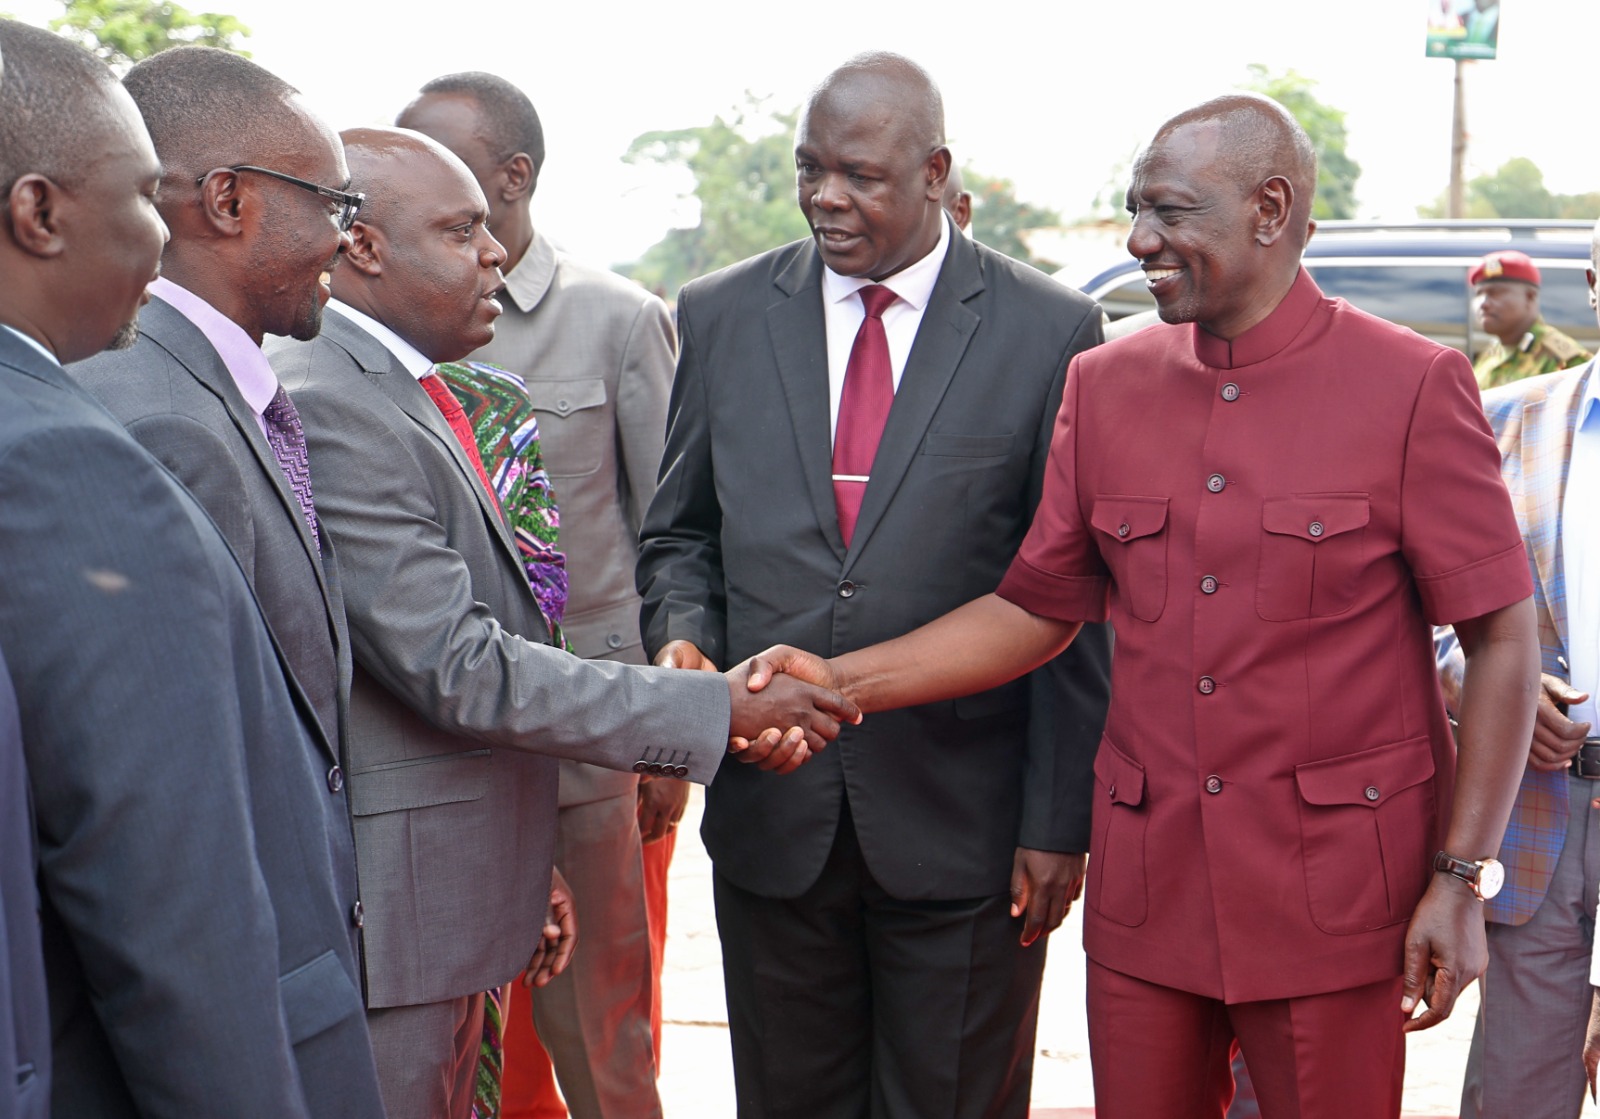 Launch of the County Assembly of Bungoma Administration block by H.E. President William Ruto